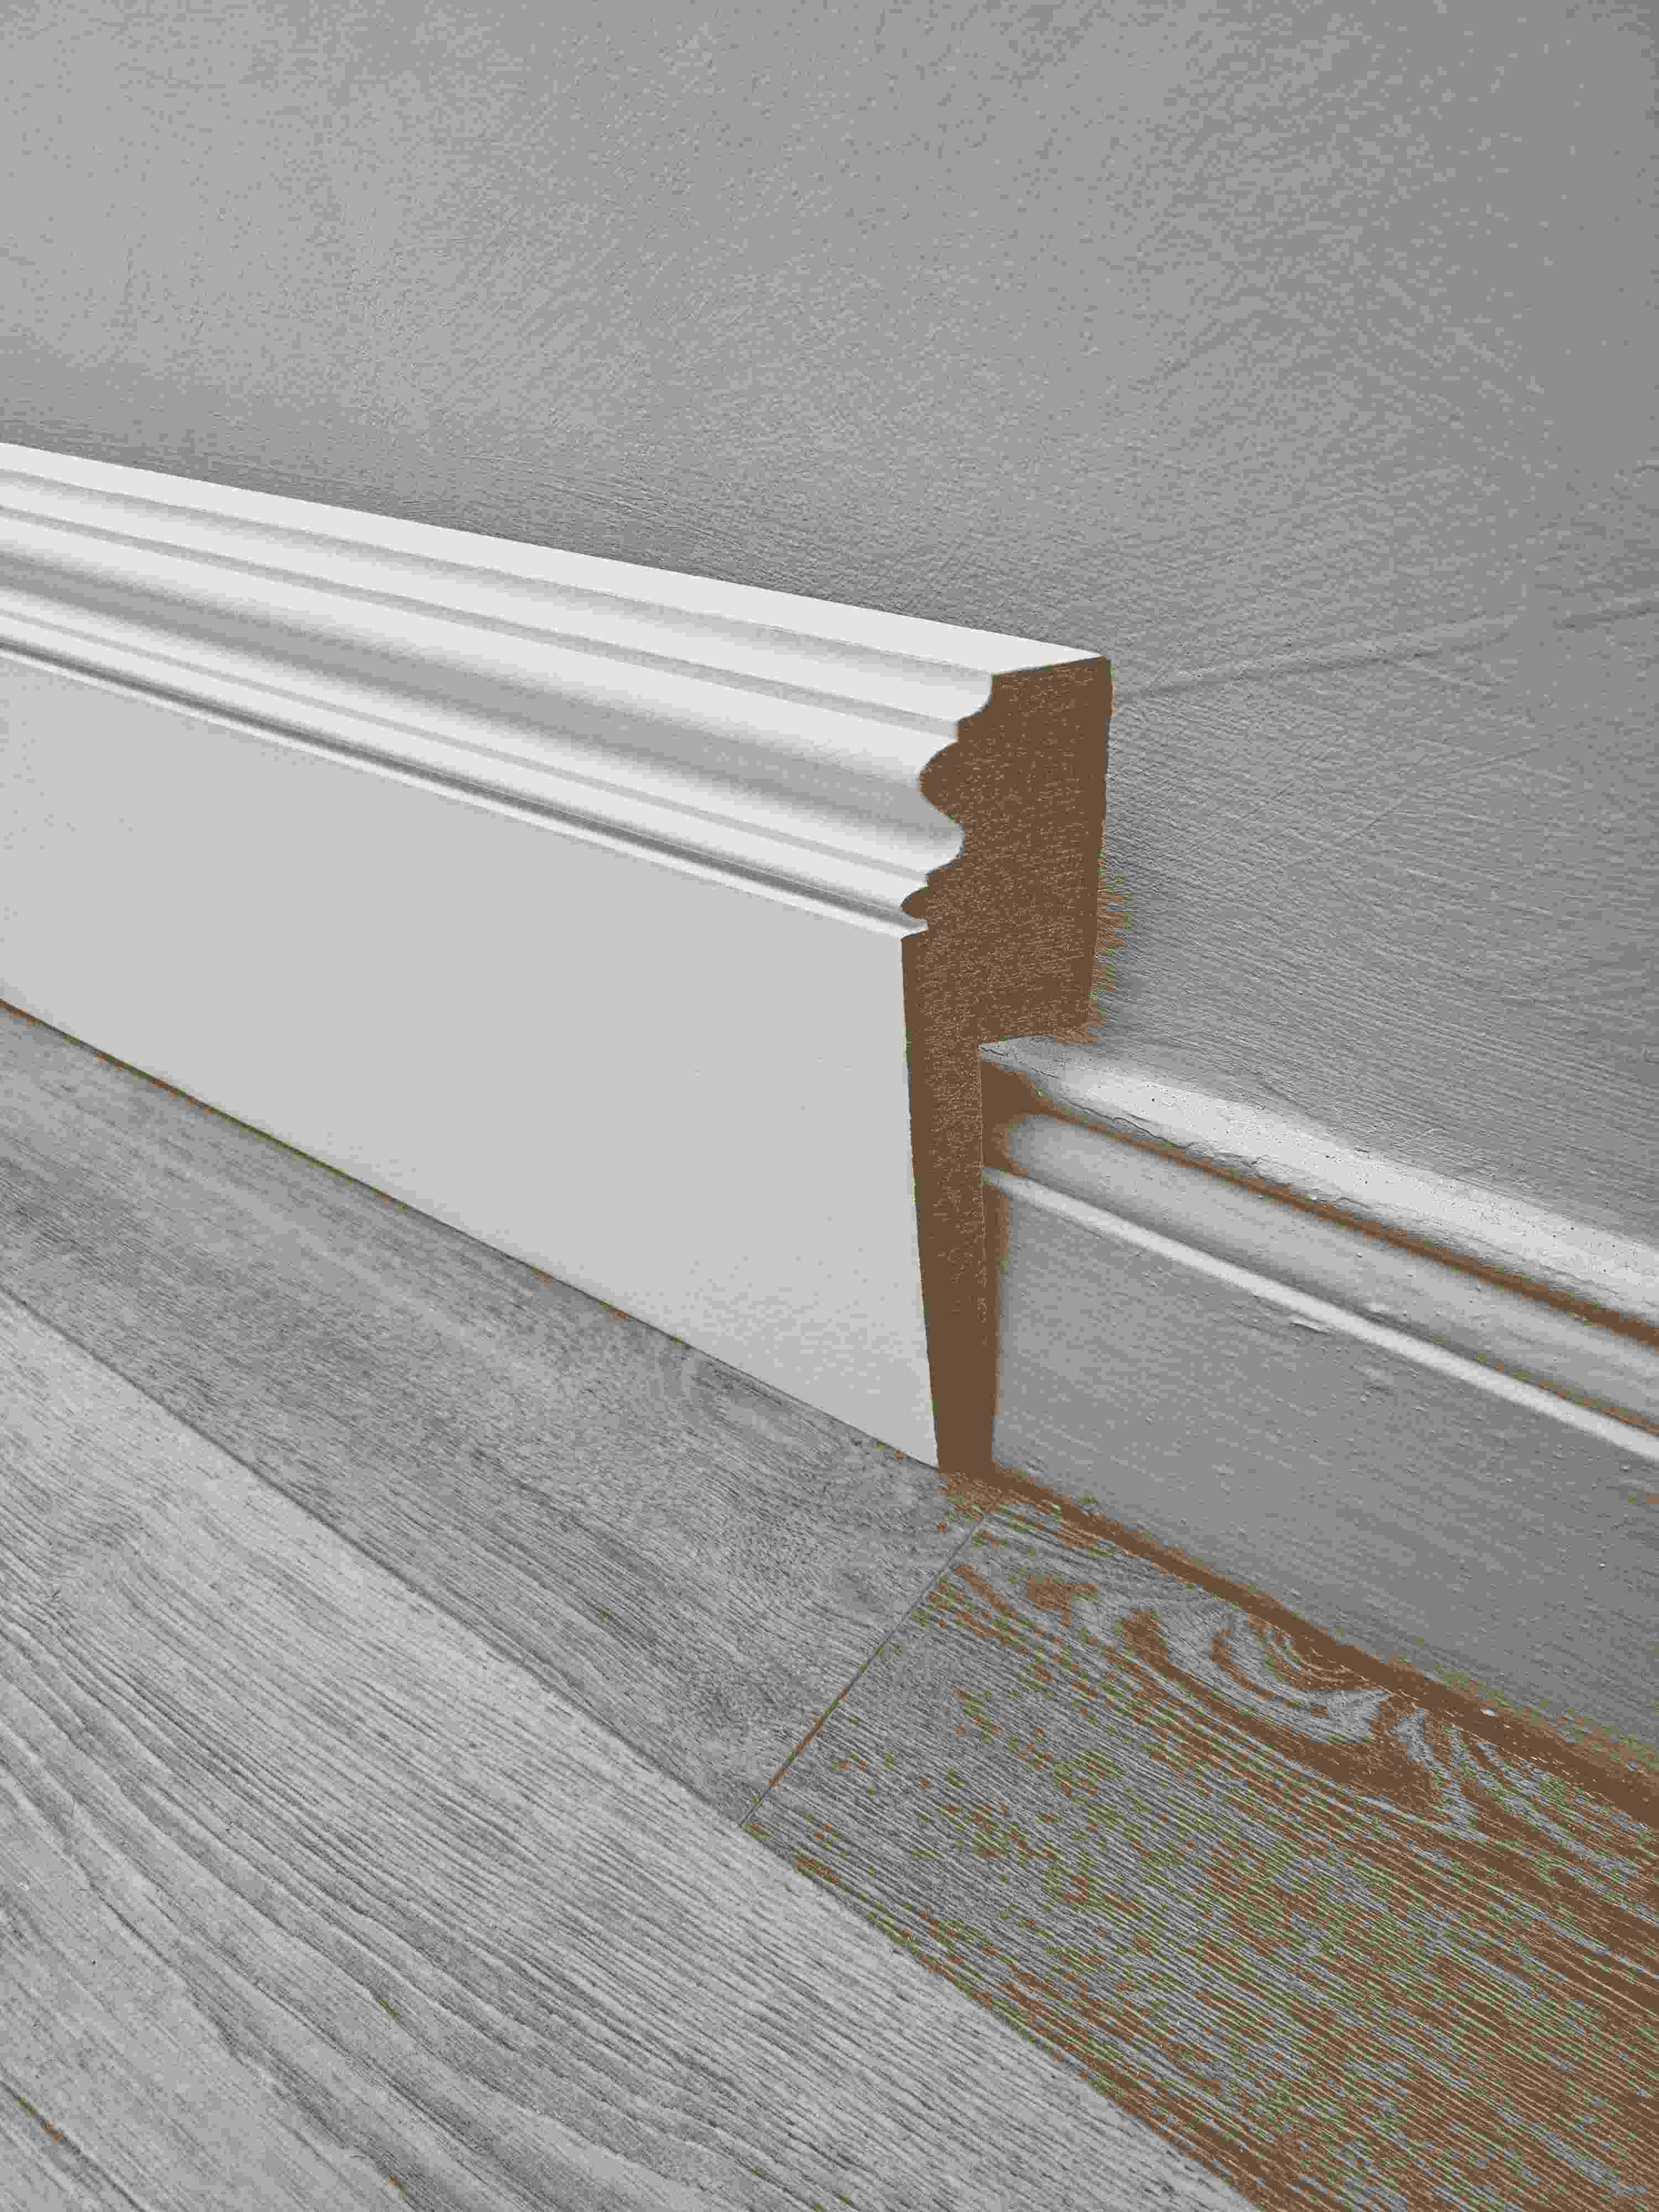 The Best Way To fill A Hole In Skirting Boards - YouTube